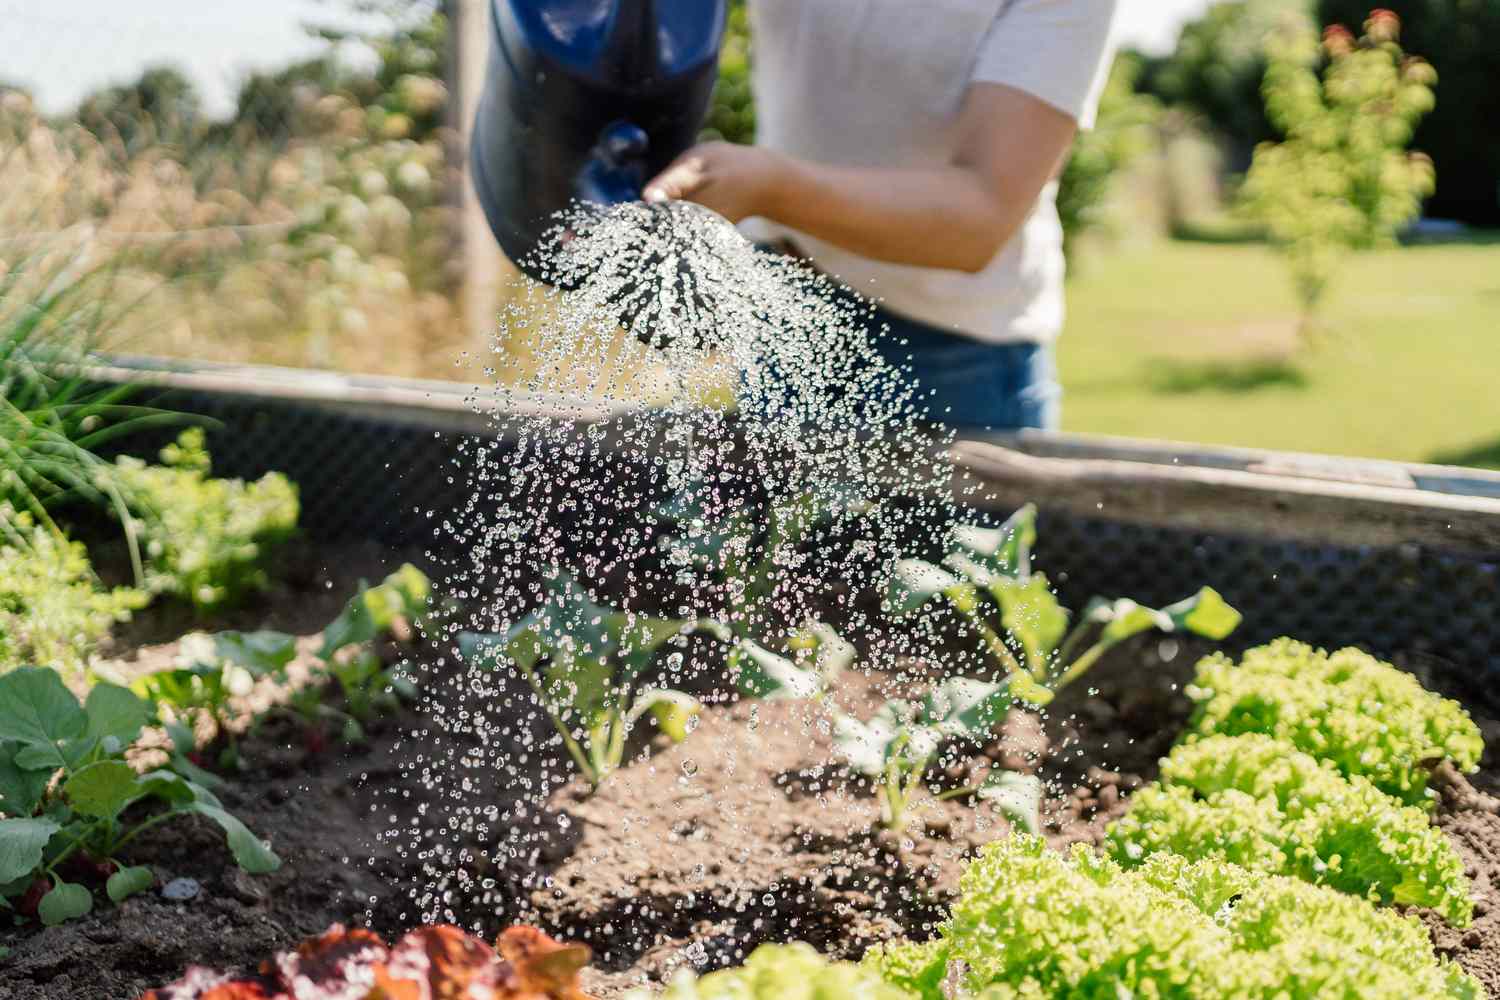 A Concise Guide to Installing a Watering and Irrigation System for a Metal Raised Garden Bed